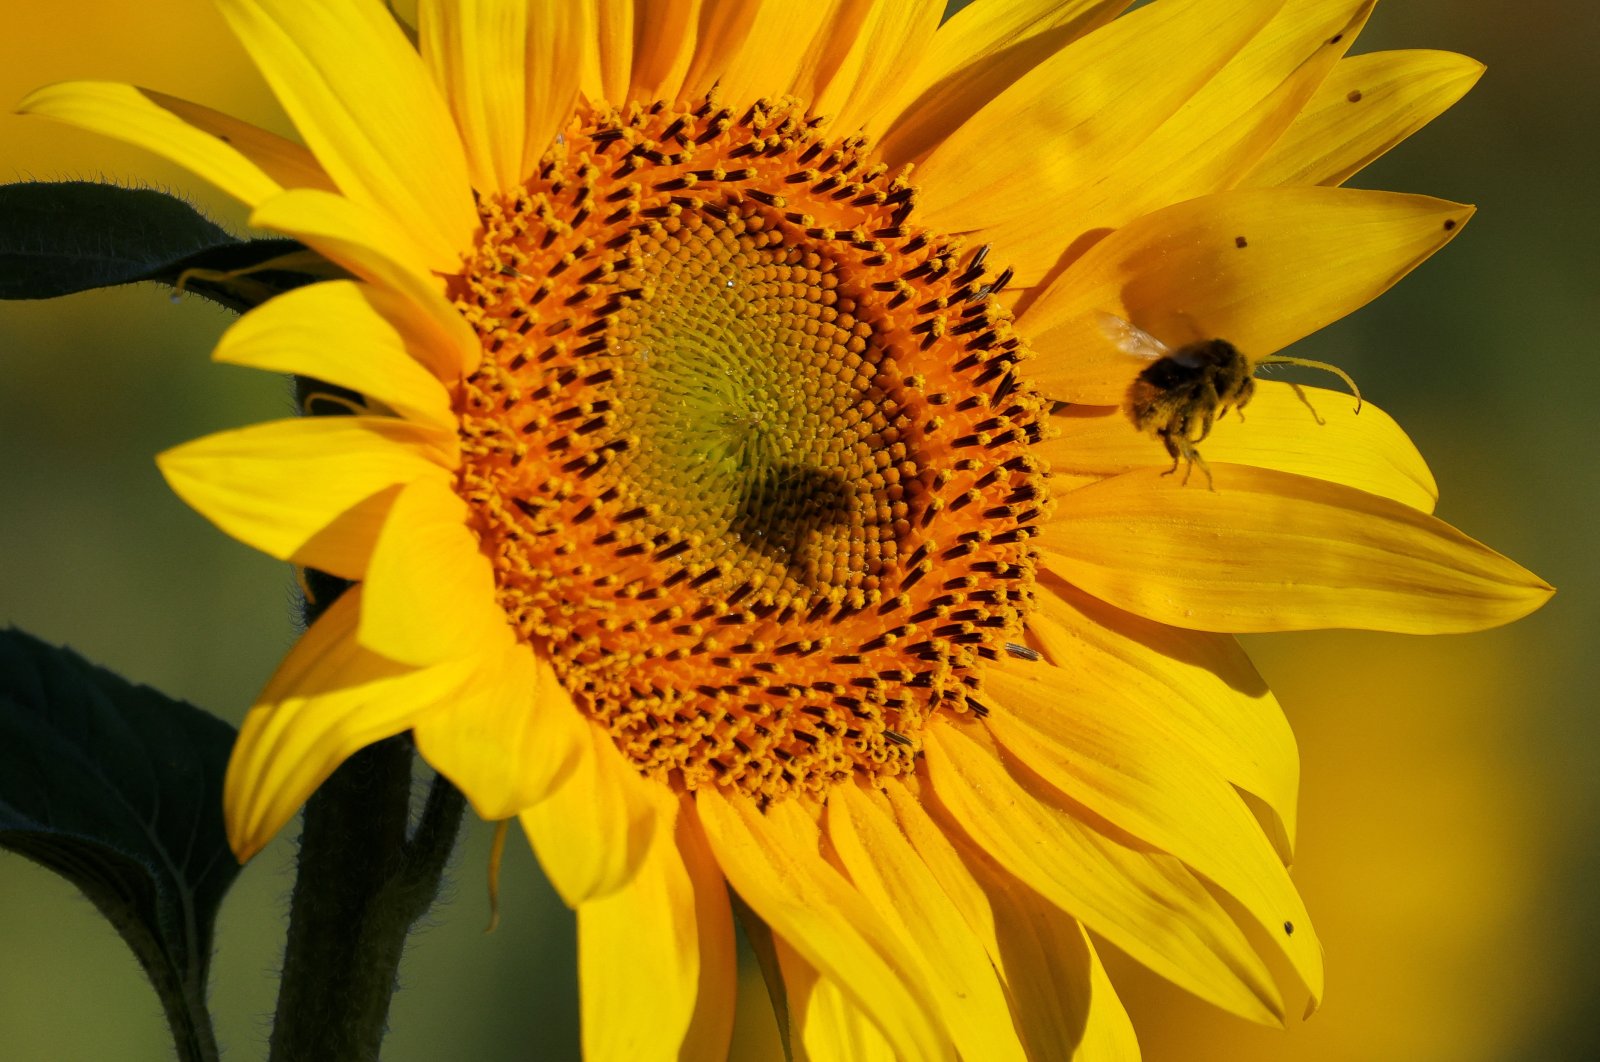 A bumblebee flies near a sunflower in a field in Neuville-Saint-Remy, France, Aug. 7, 2022. (Reuters Photo)